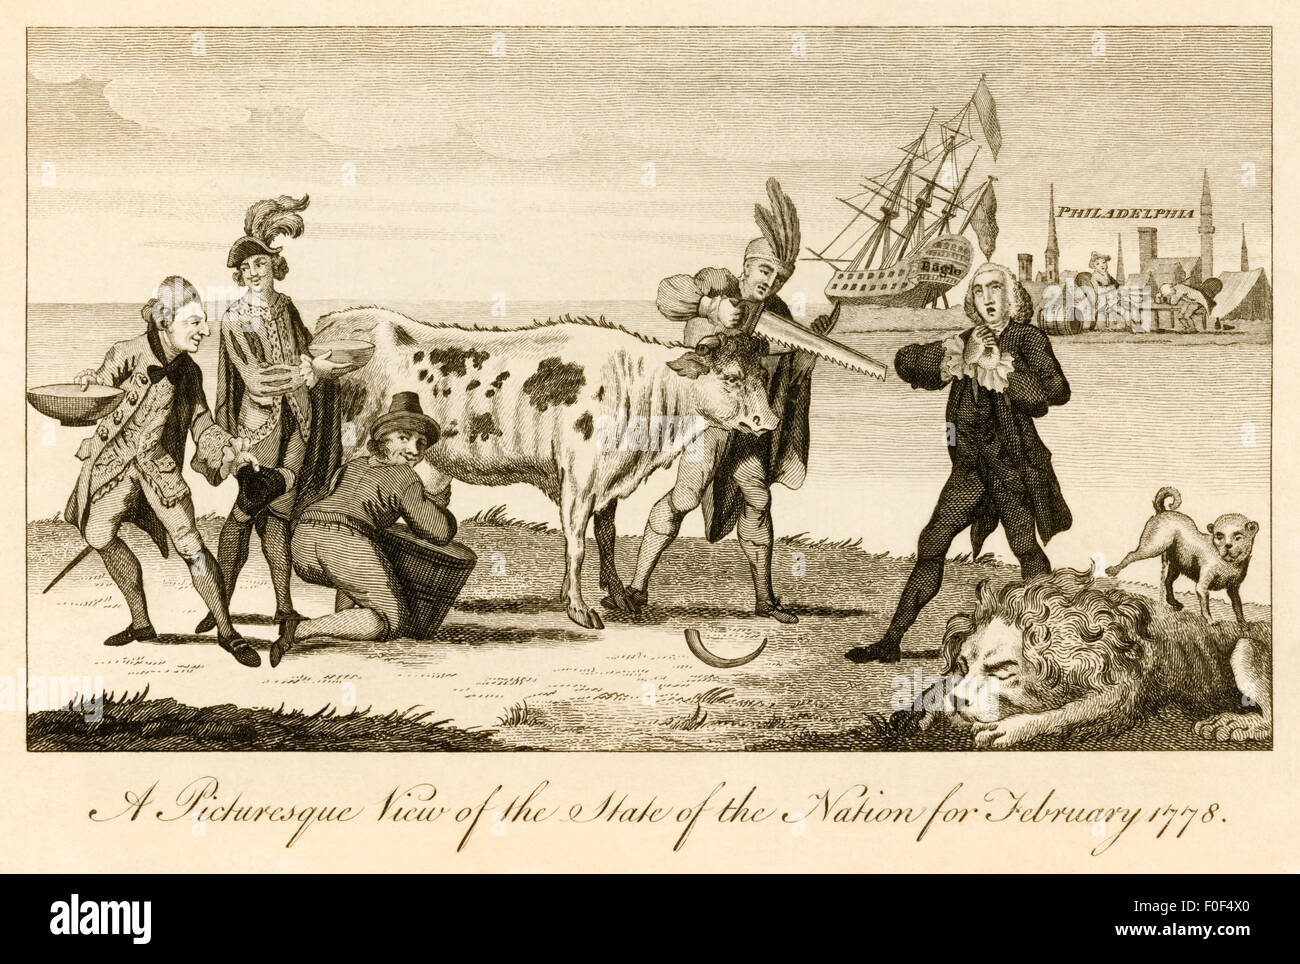 'A Picturesque View of the State of the Nation for February 1778' political cartoon published in the Westminster Magazine in February 1778. On the reverse of the print is an explanation of the satirical print. See description for more information. Stock Photo